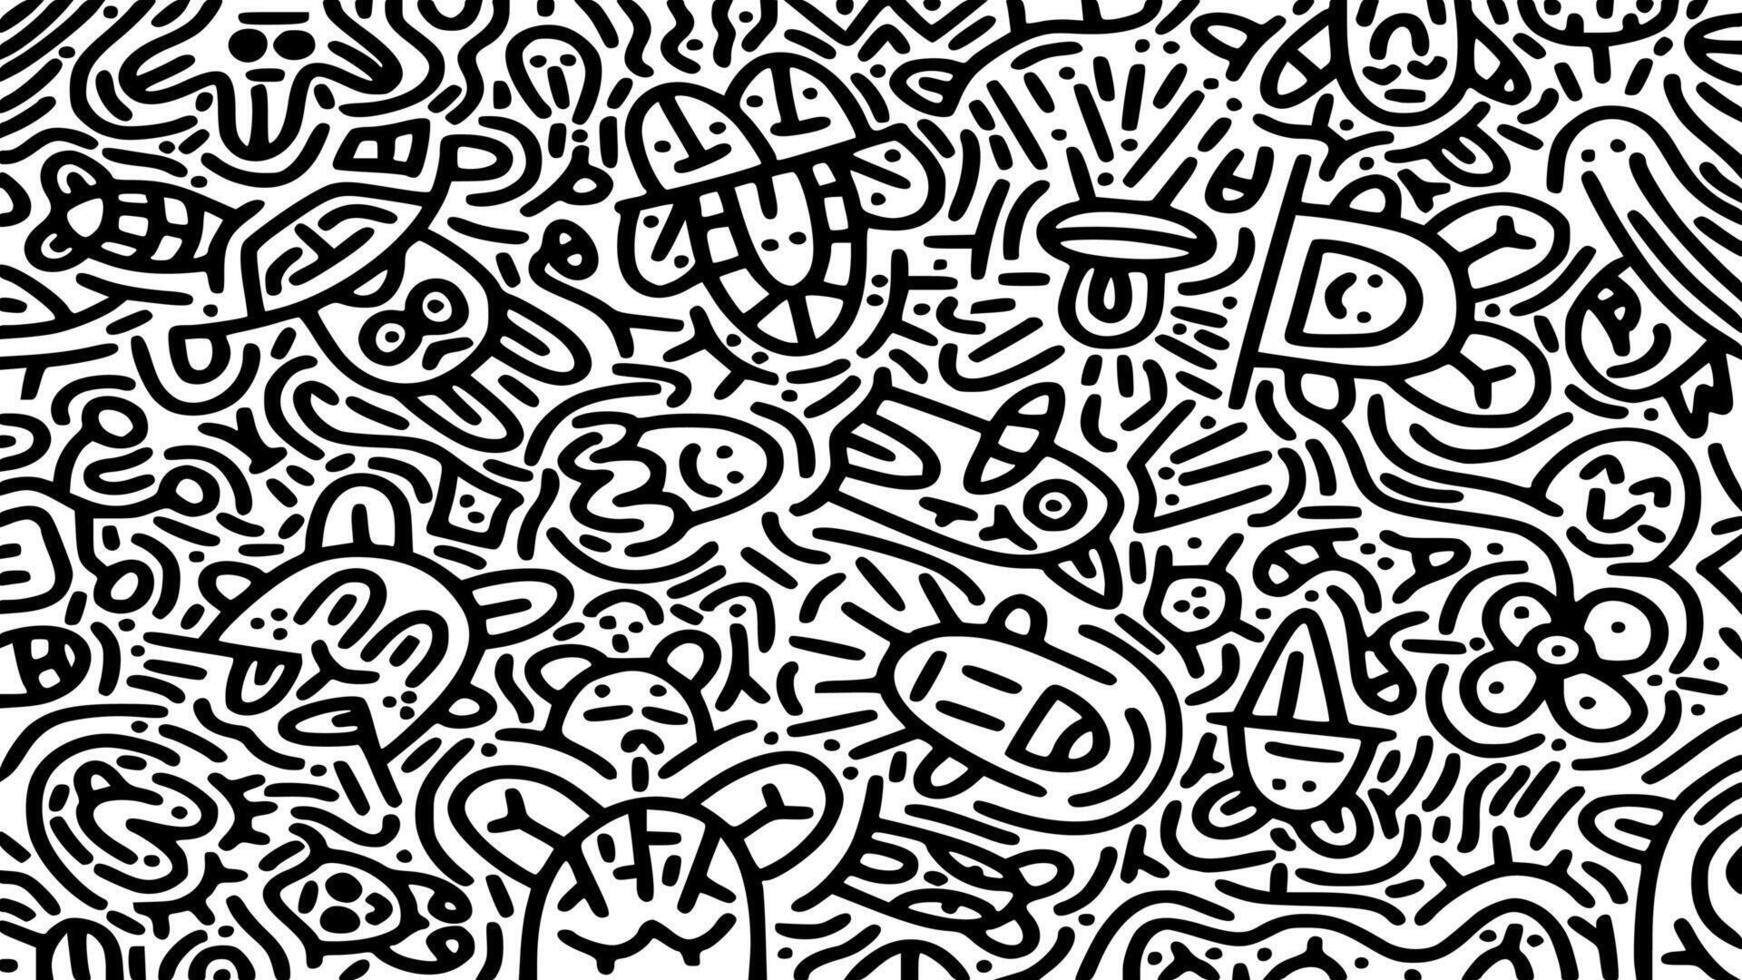 Cute hand drawn doodle art with black lines filling the paper. Creative abstract vector illustration suitable for wallpaper, drawing books, covers. Isolated on white background